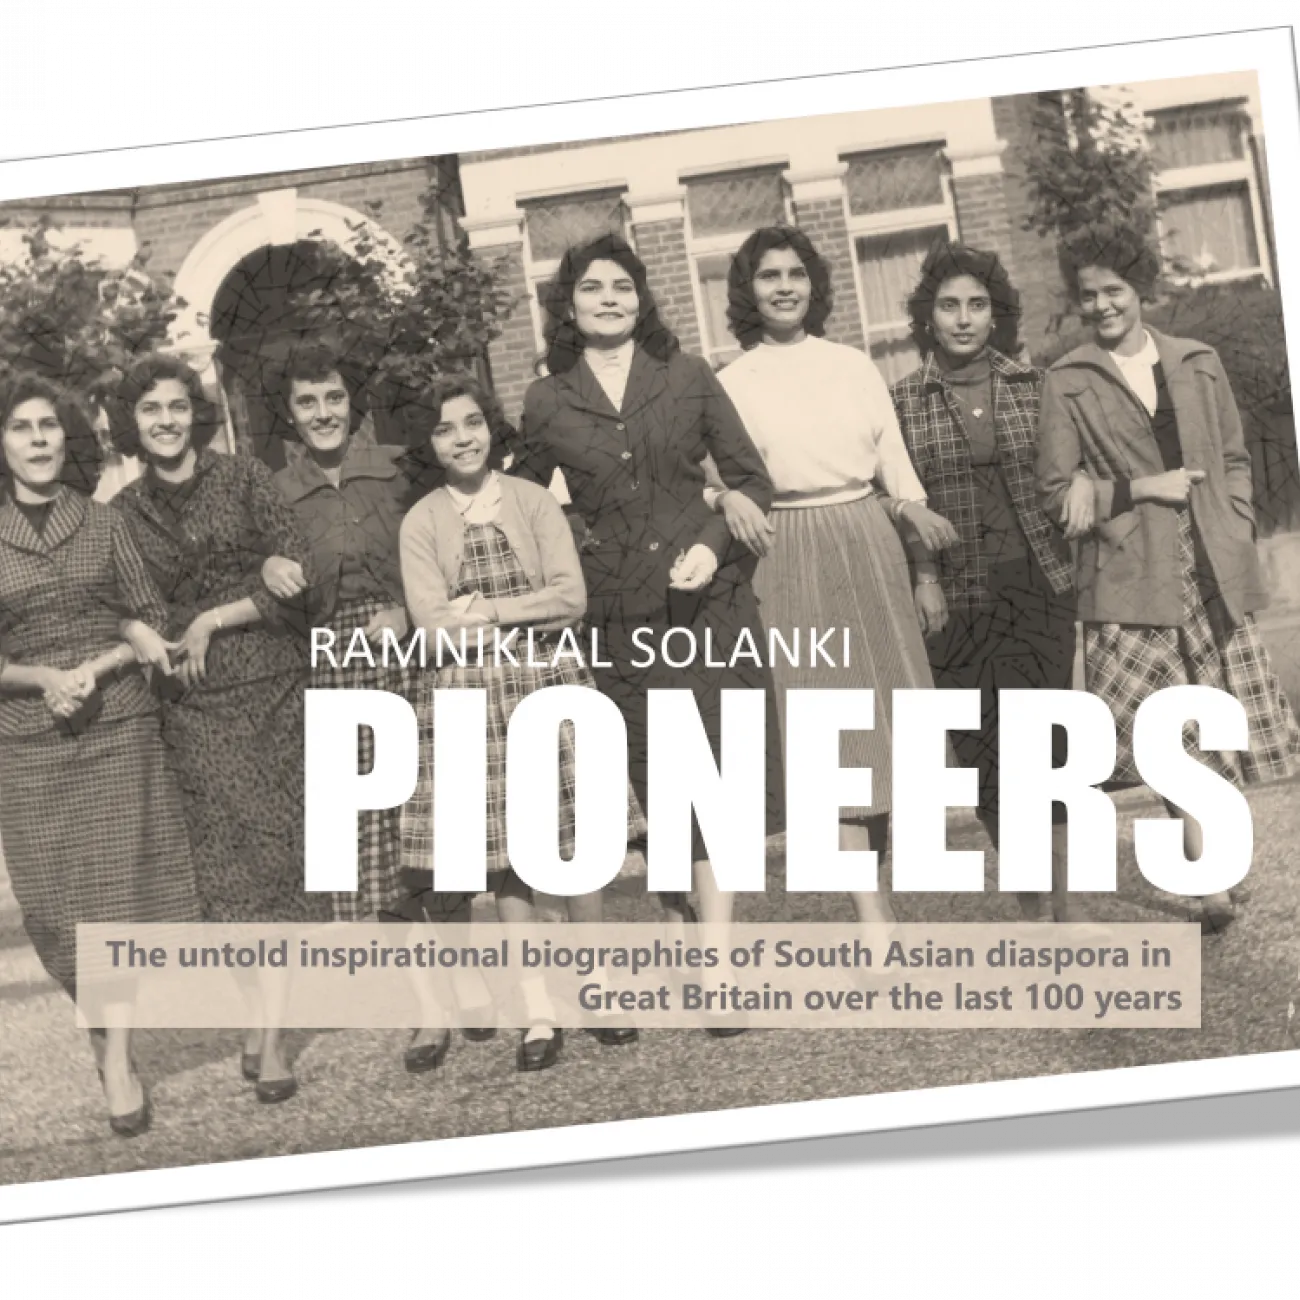 Historical image of a group of people. The Ramniklal Solanki pioneers project is the untold inspirational biographies of South Asian diaspora in Great Britain over the last 100 years.